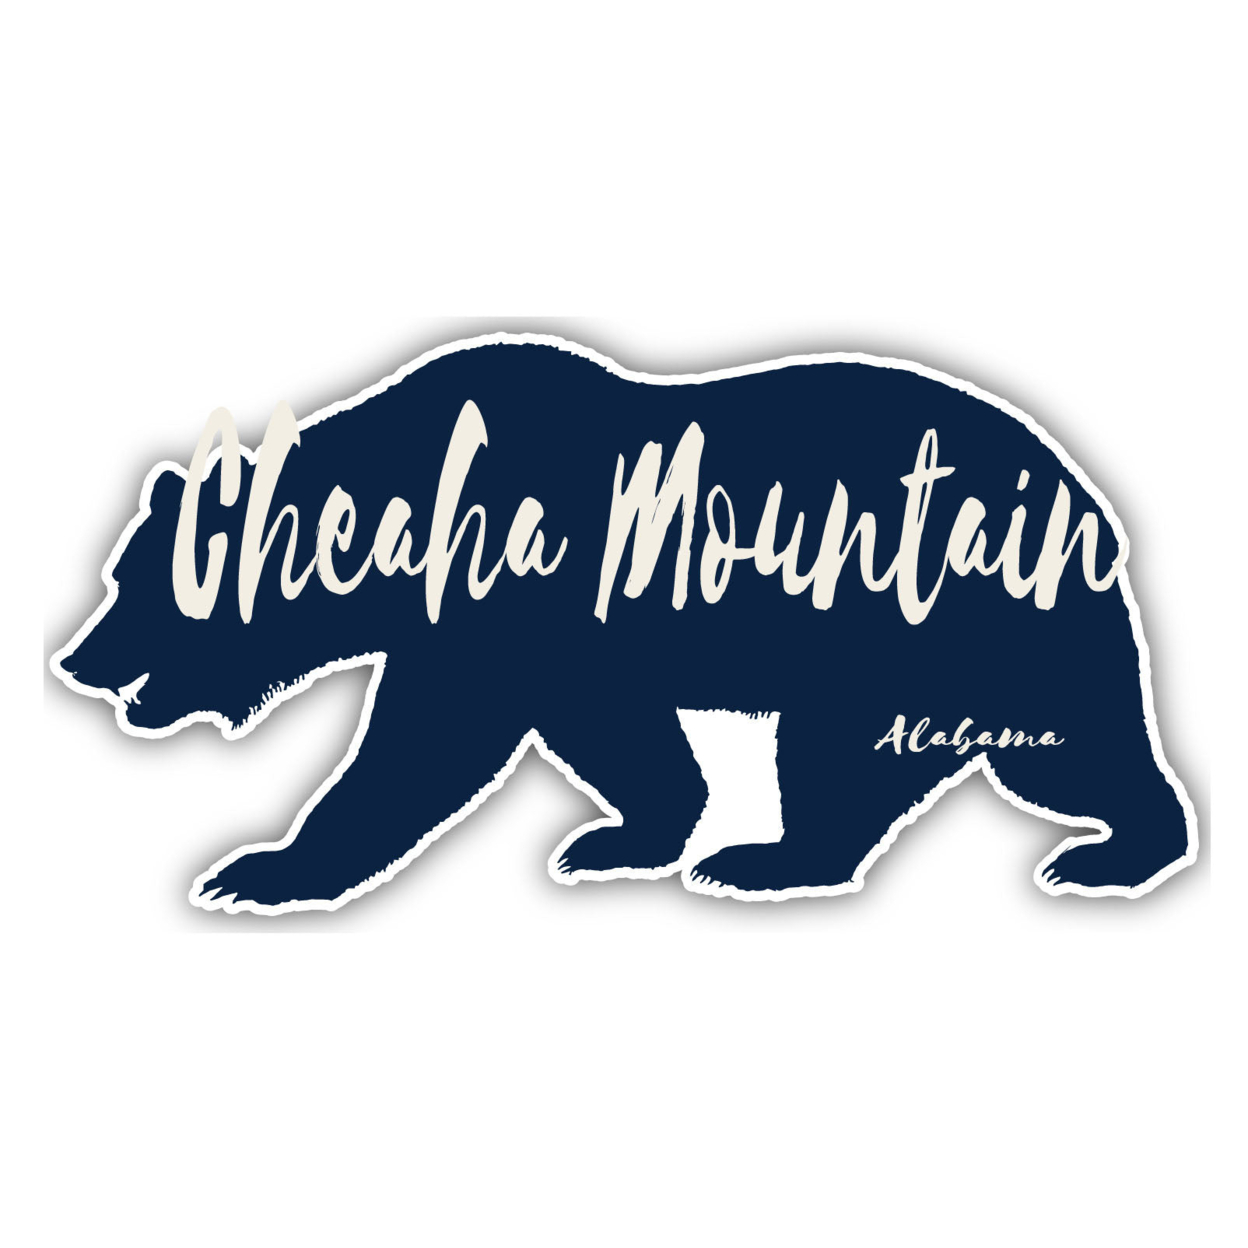 Cheaha Mountain Alabama Souvenir Decorative Stickers (Choose Theme And Size) - 4-Pack, 10-Inch, Camp Life